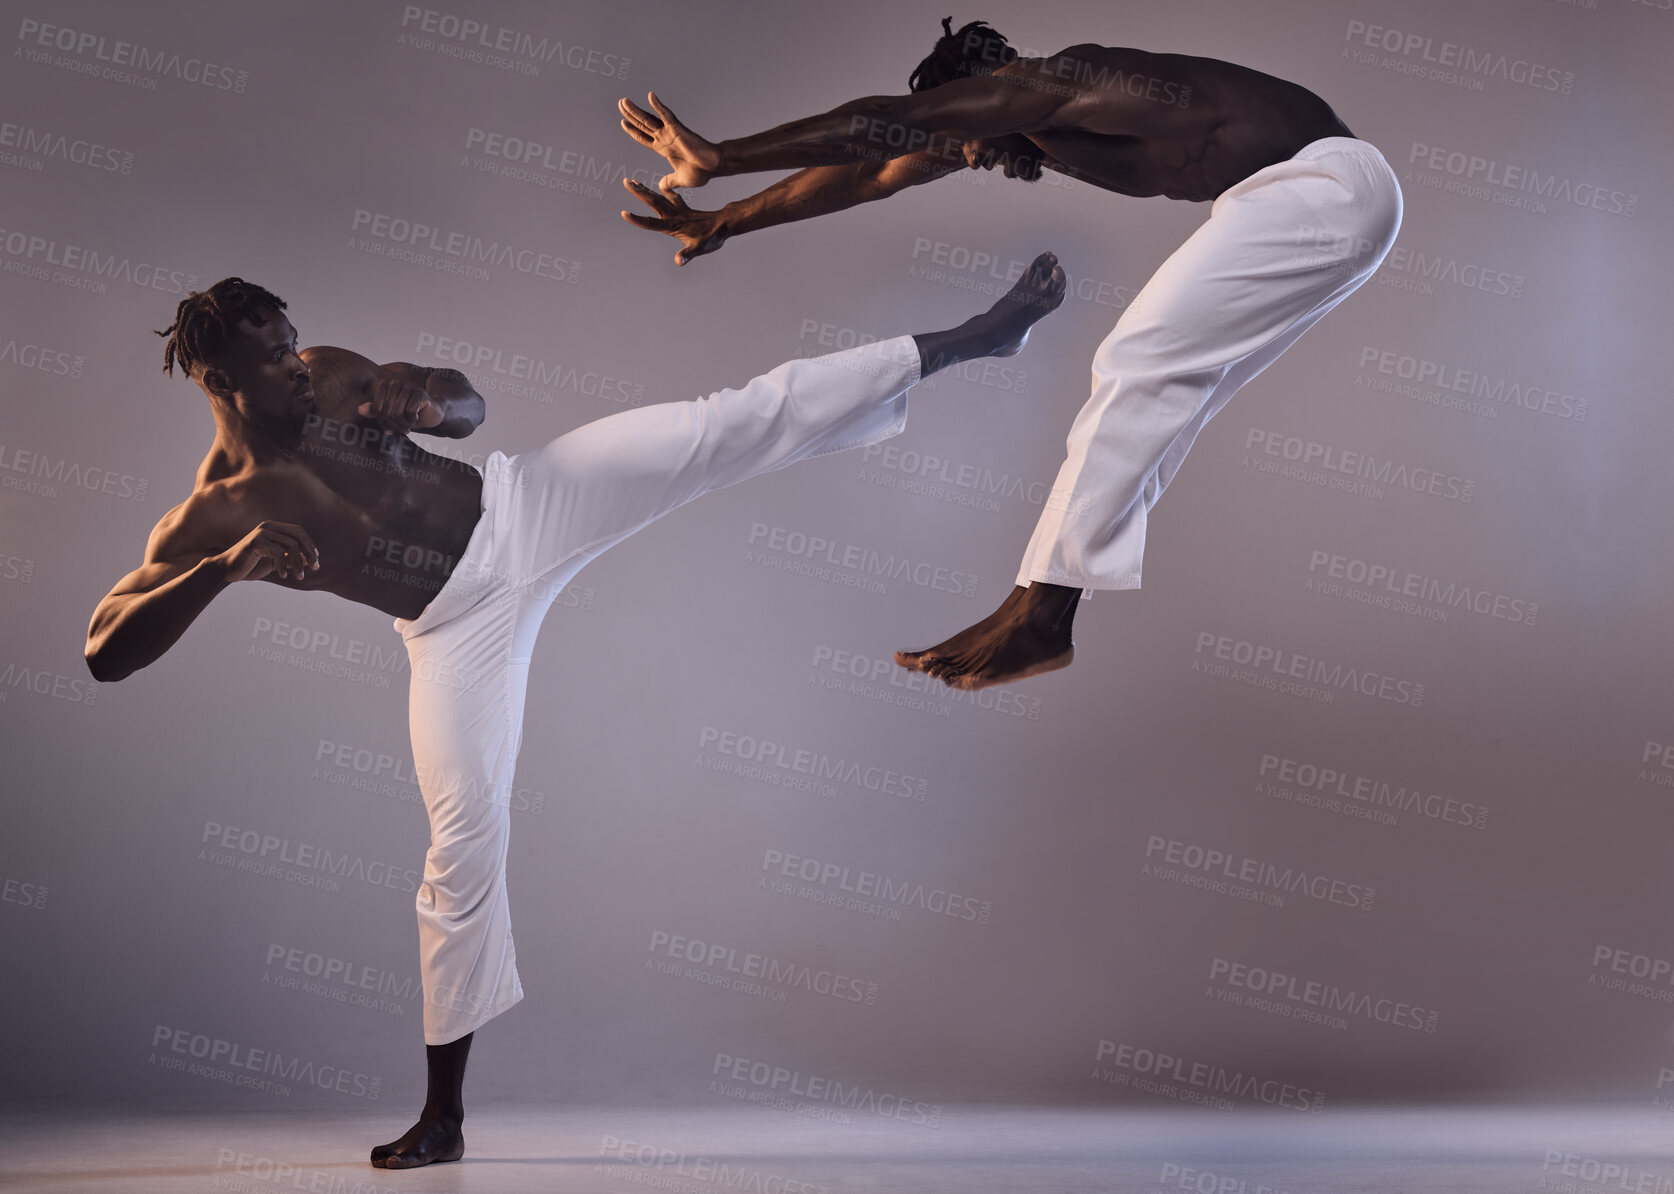 Buy stock photo Shot of two men fighting against a grey background